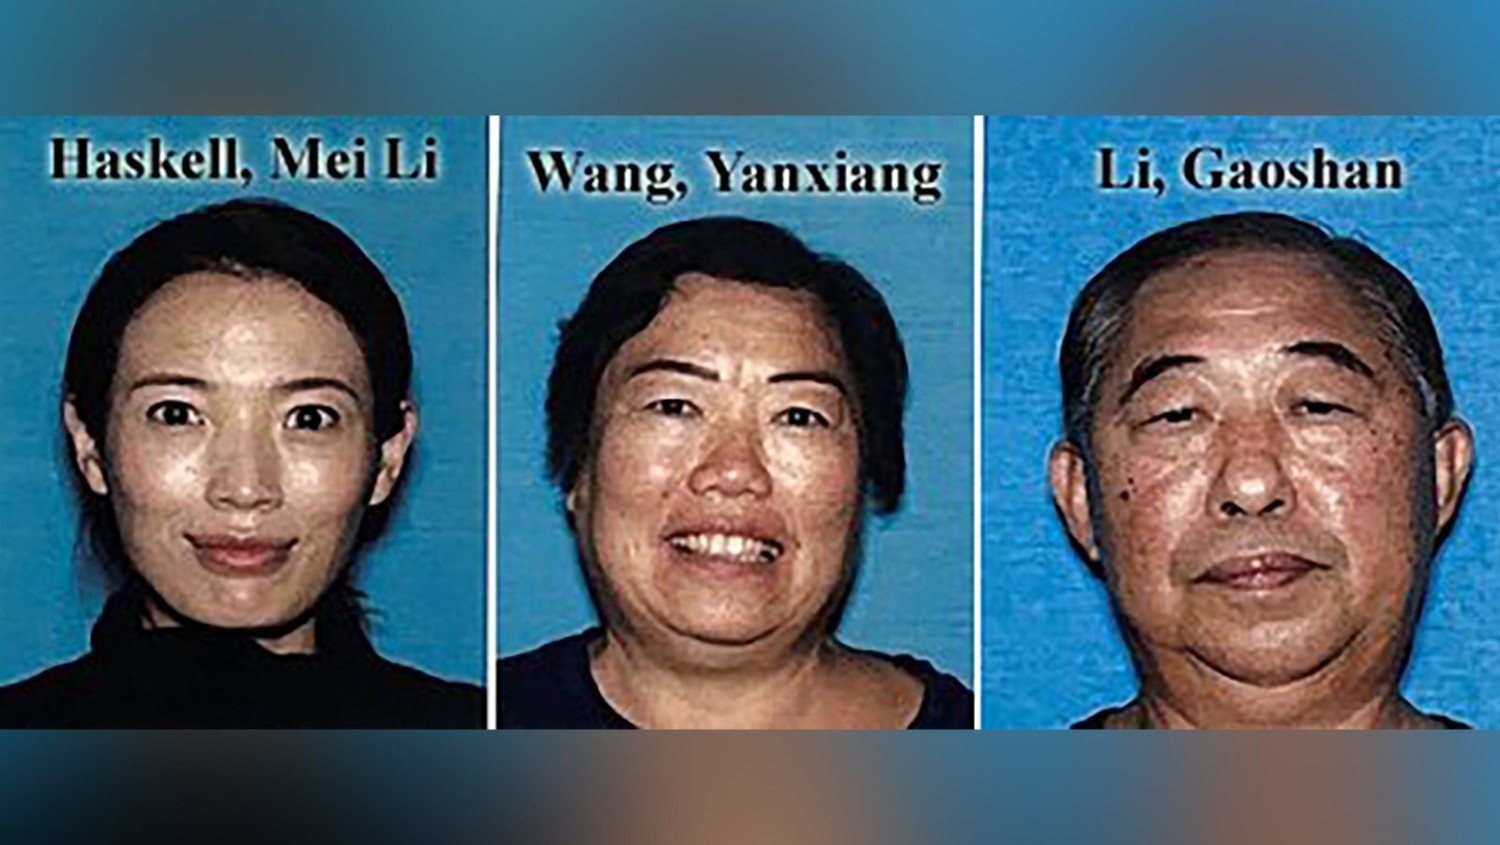 Mei Li Haskell, 37, Yanxiang Wang, 64, and Gaoshan Li, 71, are missing, the Los Angeles Police Department said. Los Angeles Police Department